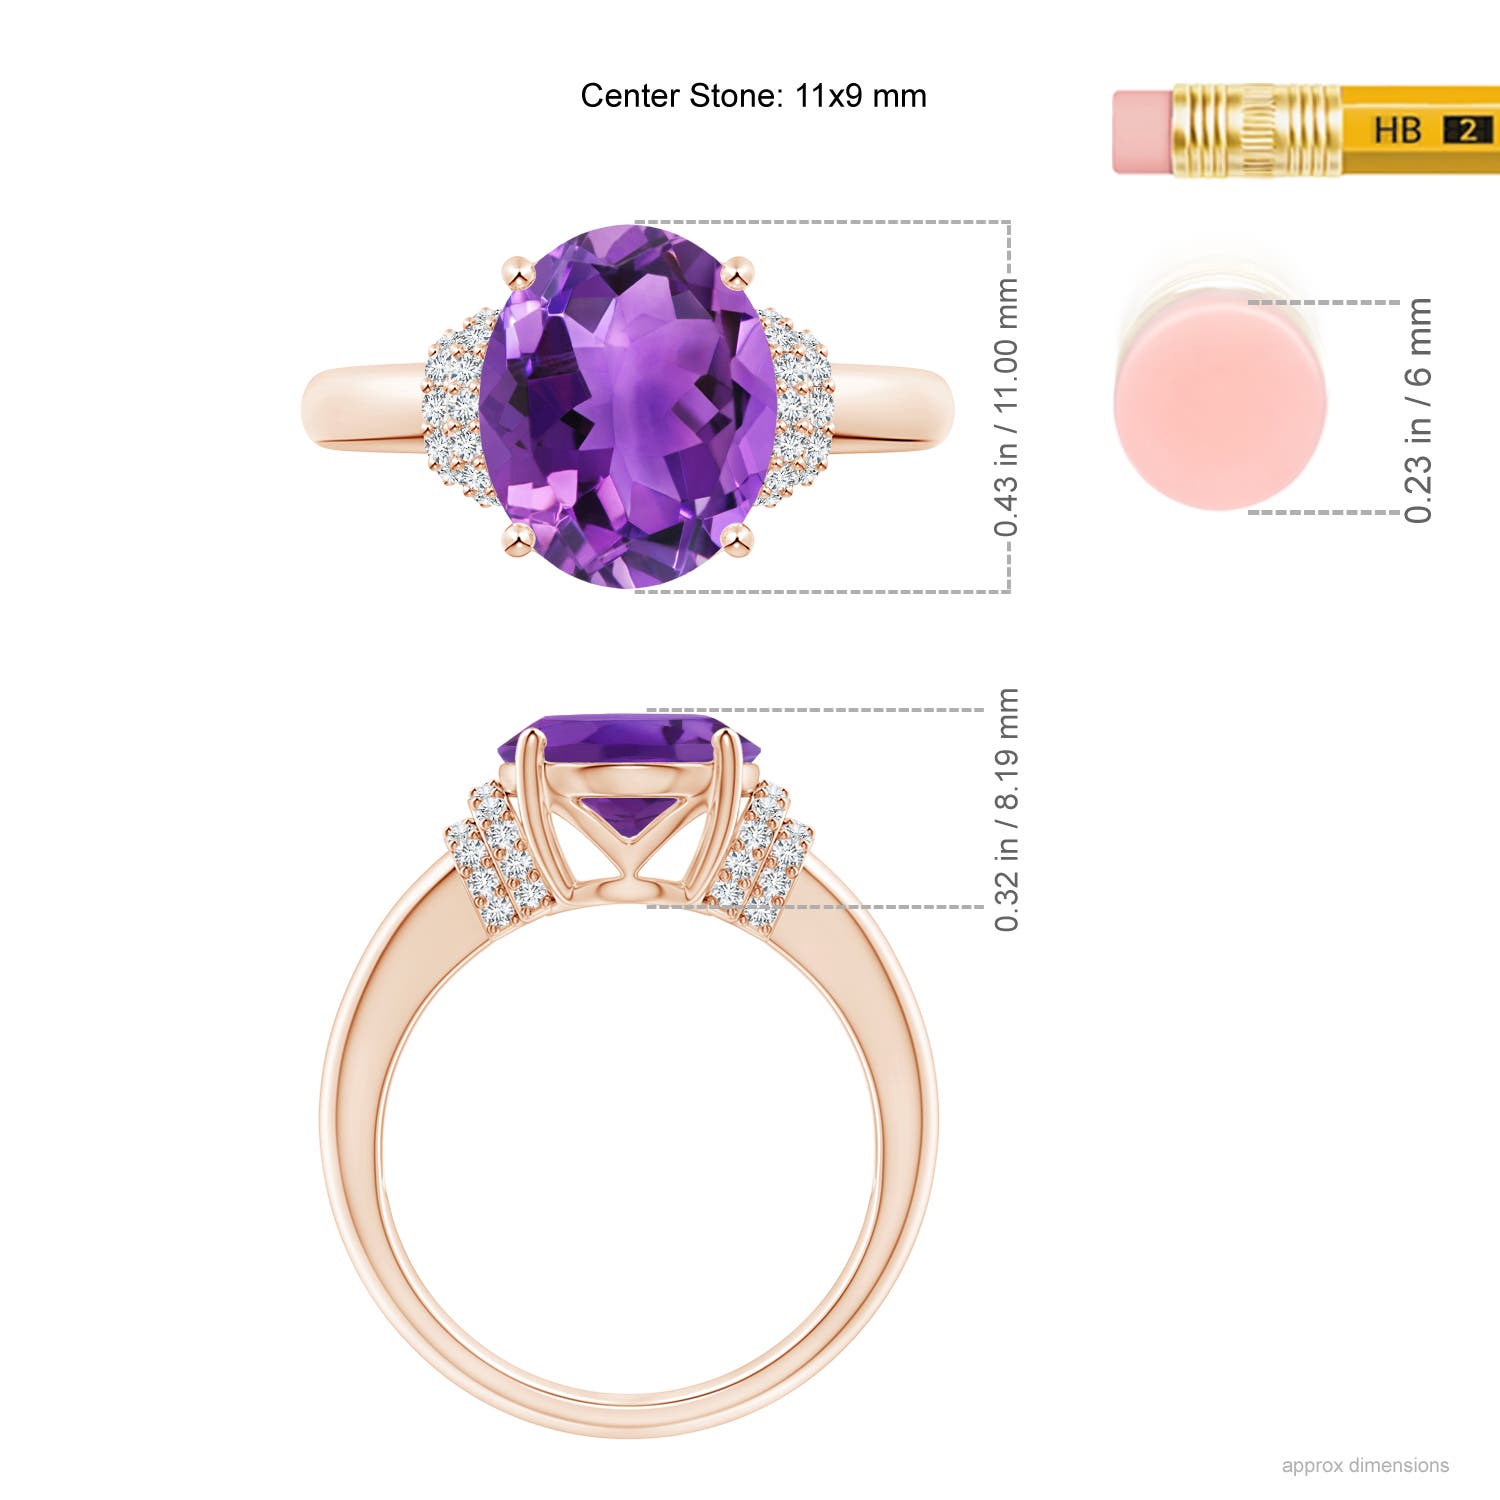 AAA - Amethyst / 3.35 CT / 14 KT Rose Gold